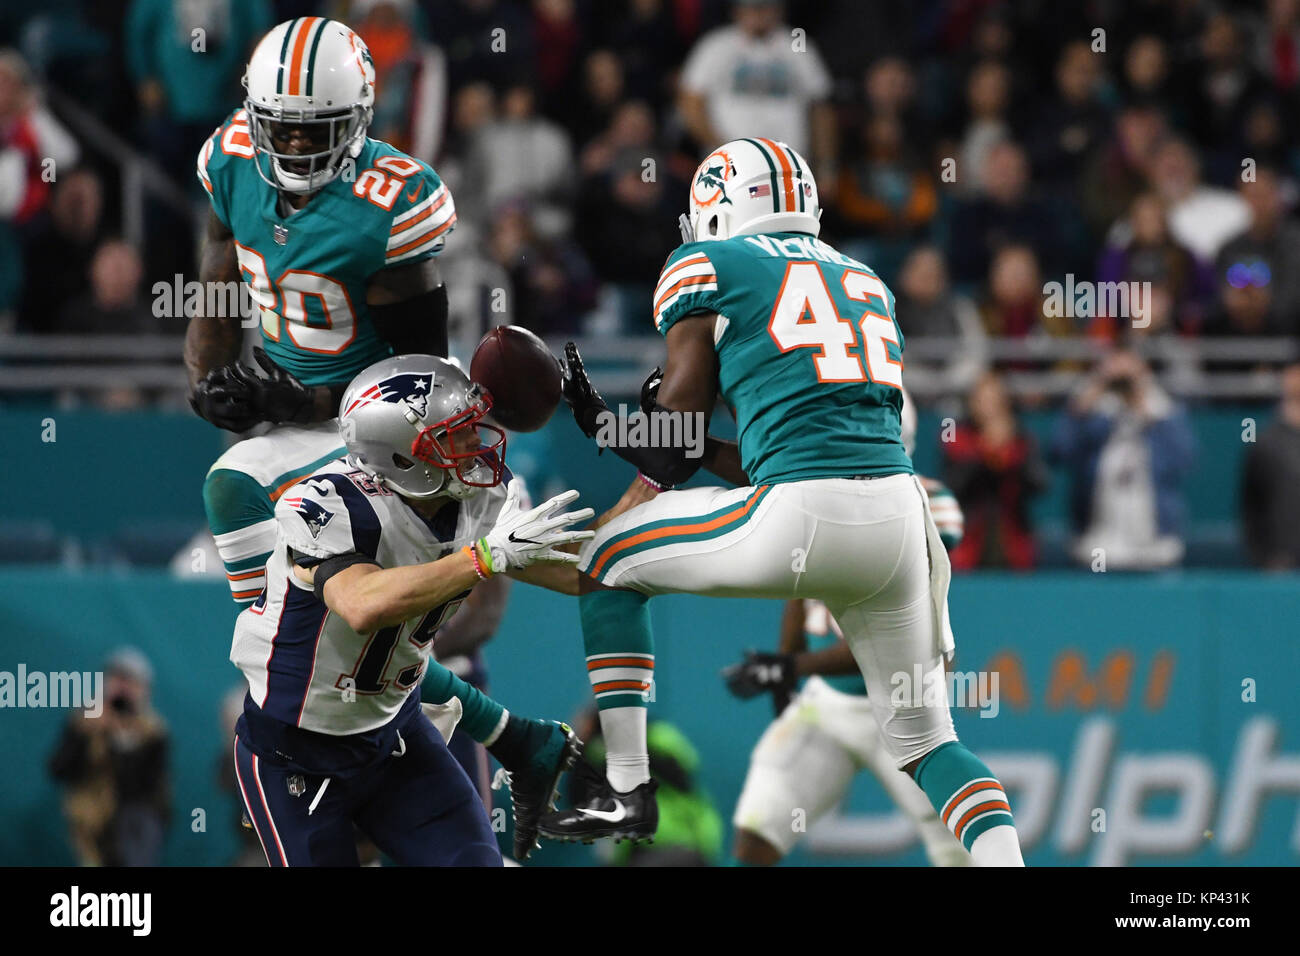 Miami Gardens FL, USA. 11th Dec, 2017. Chris Hogan #15 of New England is defended by Alterraun Verner #42 and Reshad Jones #20 of Miami during the NFL football game between the Miami Dolphins and New England Patriots at Hard Rock Stadium in Miami Gardens FL. The Dolphins defeated the Patriots 27-20. Credit: csm/Alamy Live News Stock Photo